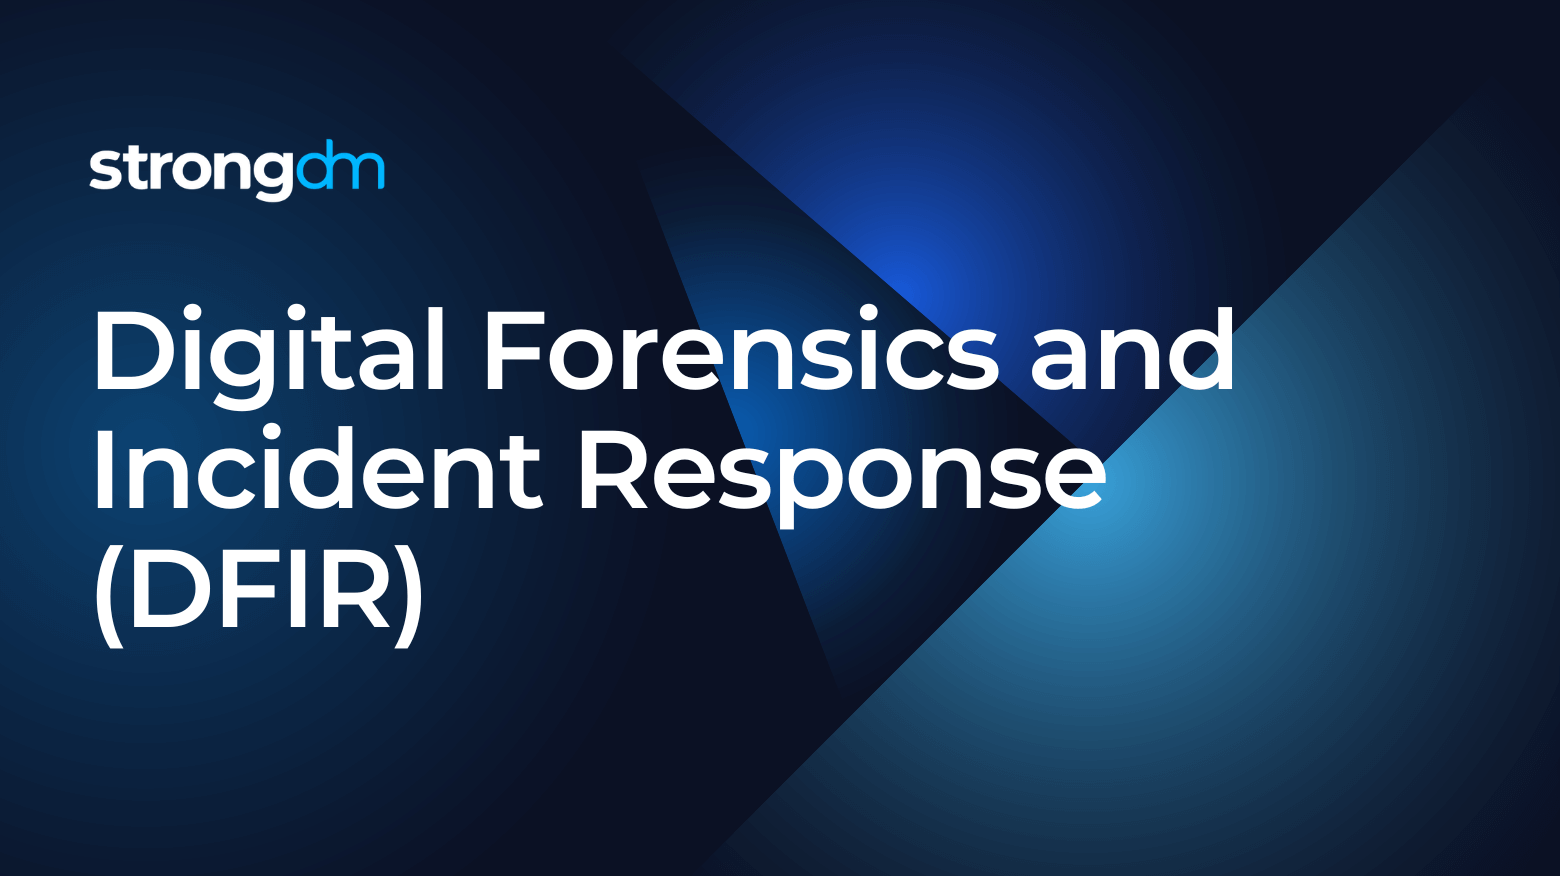 What is Digital Forensics and Incident Response (DFIR)?